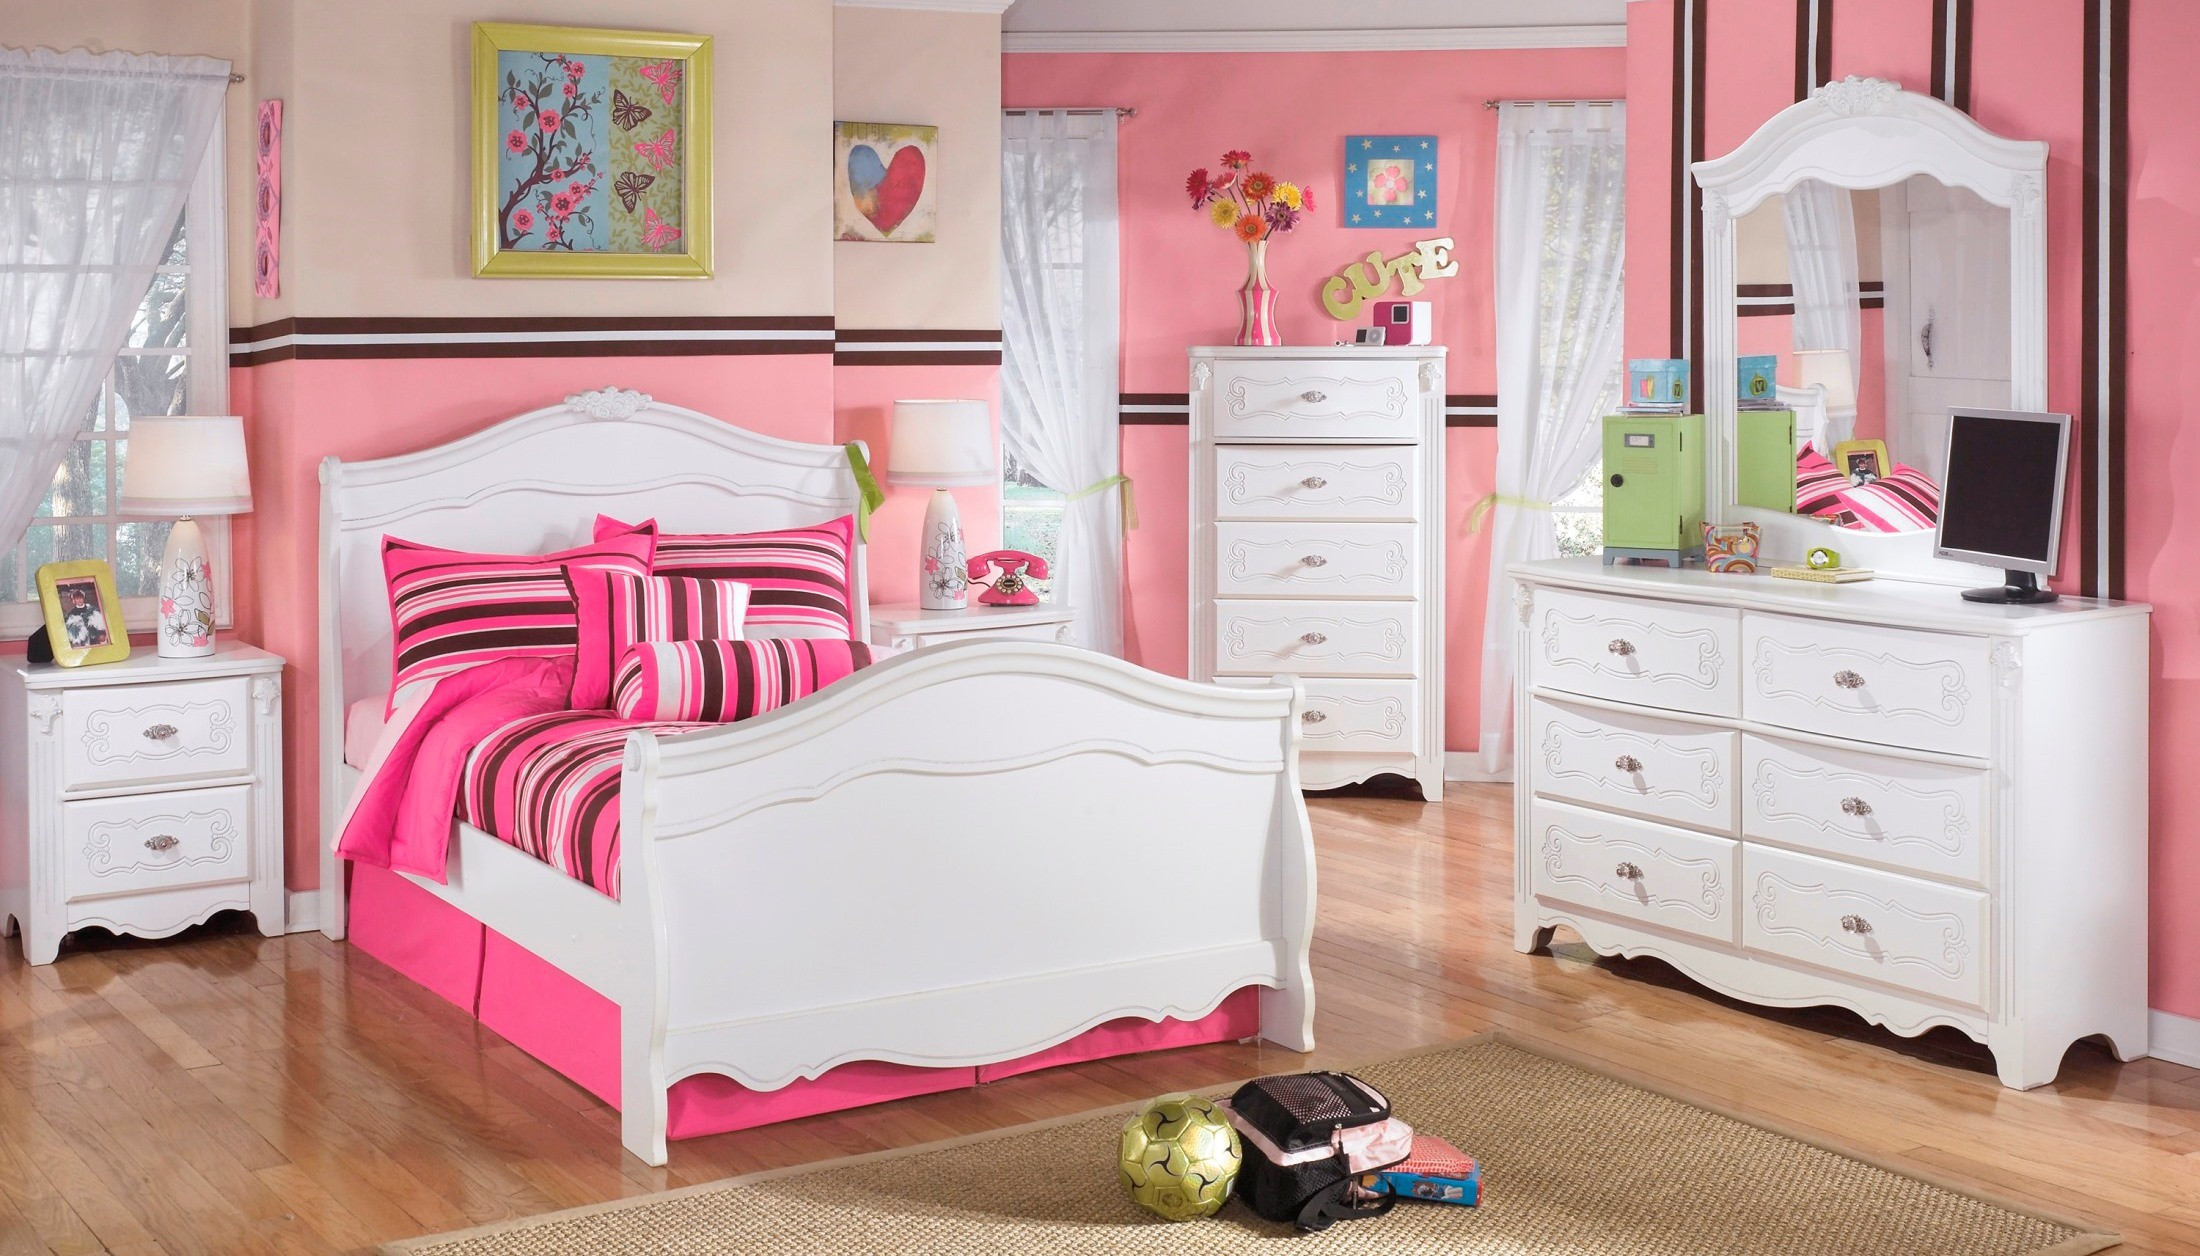 Exquisite Youth Sleigh Bedroom Set with regard to size 2200 X 1256